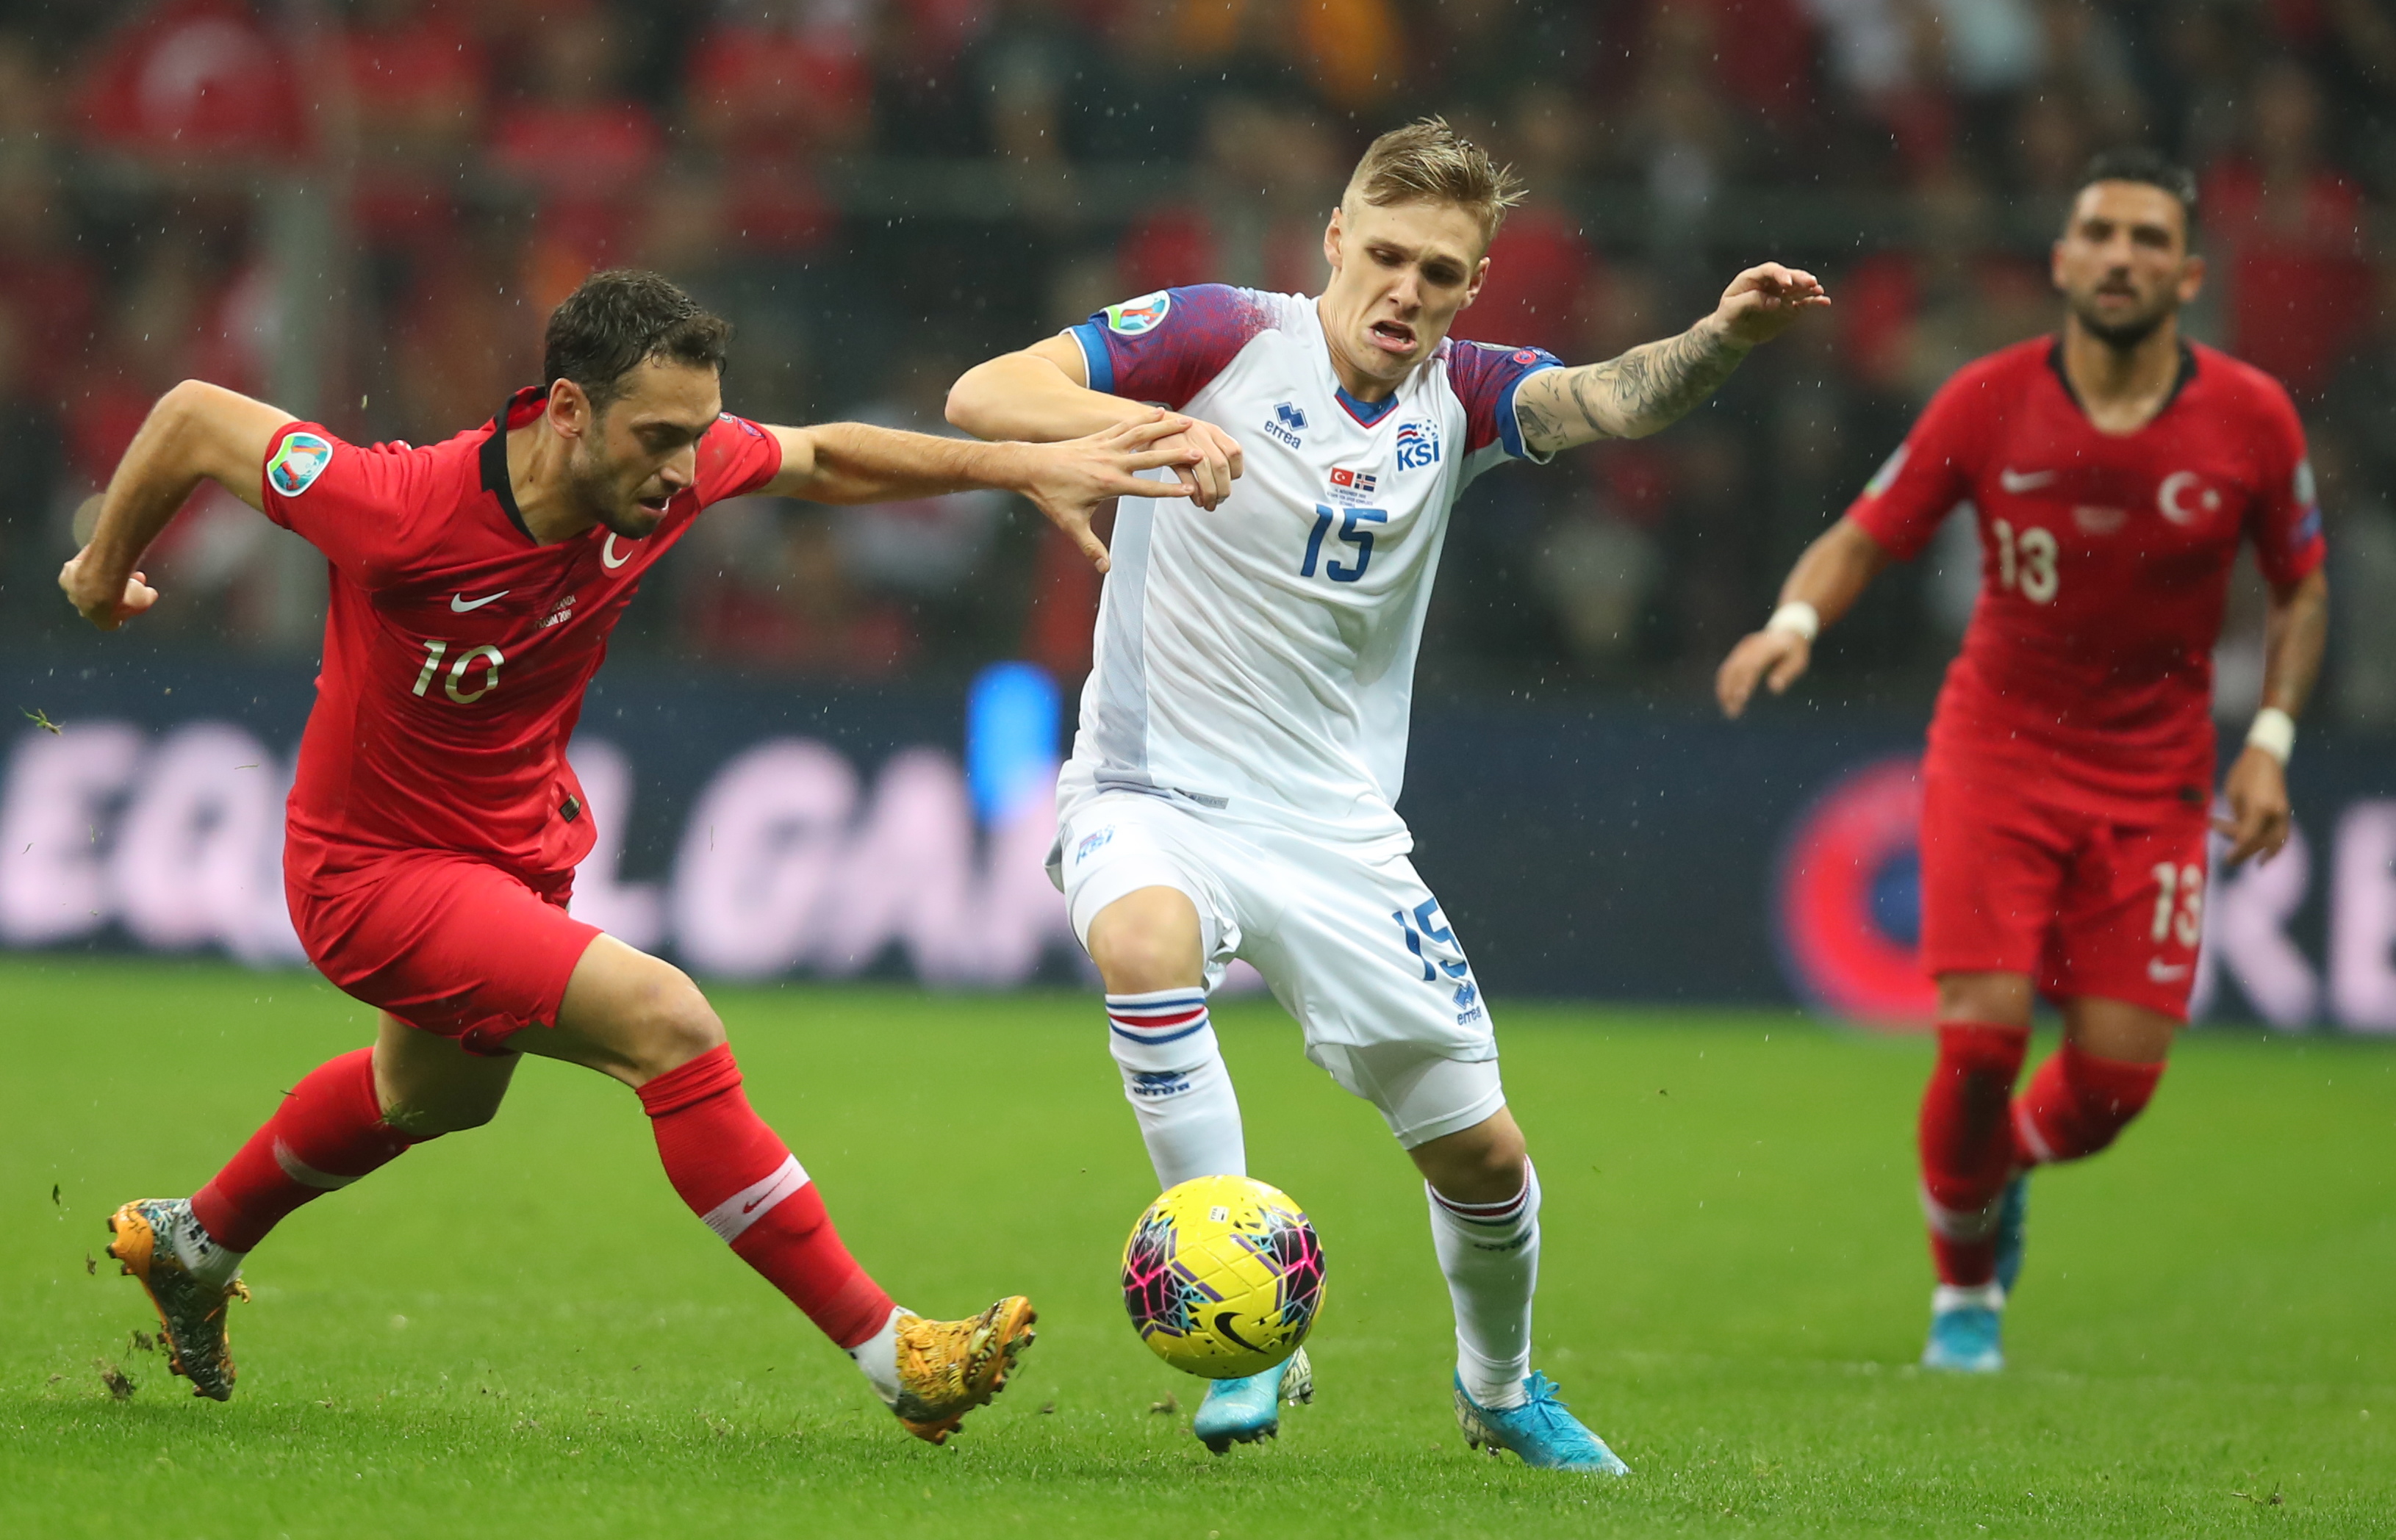 epa07996322 Turkey's Hakan Calhanoglu (L) in action against Iceland's Amor Sigurdsson (R) during the UEFA Euro 2020 qualifier Group H soccer match between Turkey and Iceland in Istanbul, Turkey, 14 November 2019.  EPA/TOLGA BOZOGLU